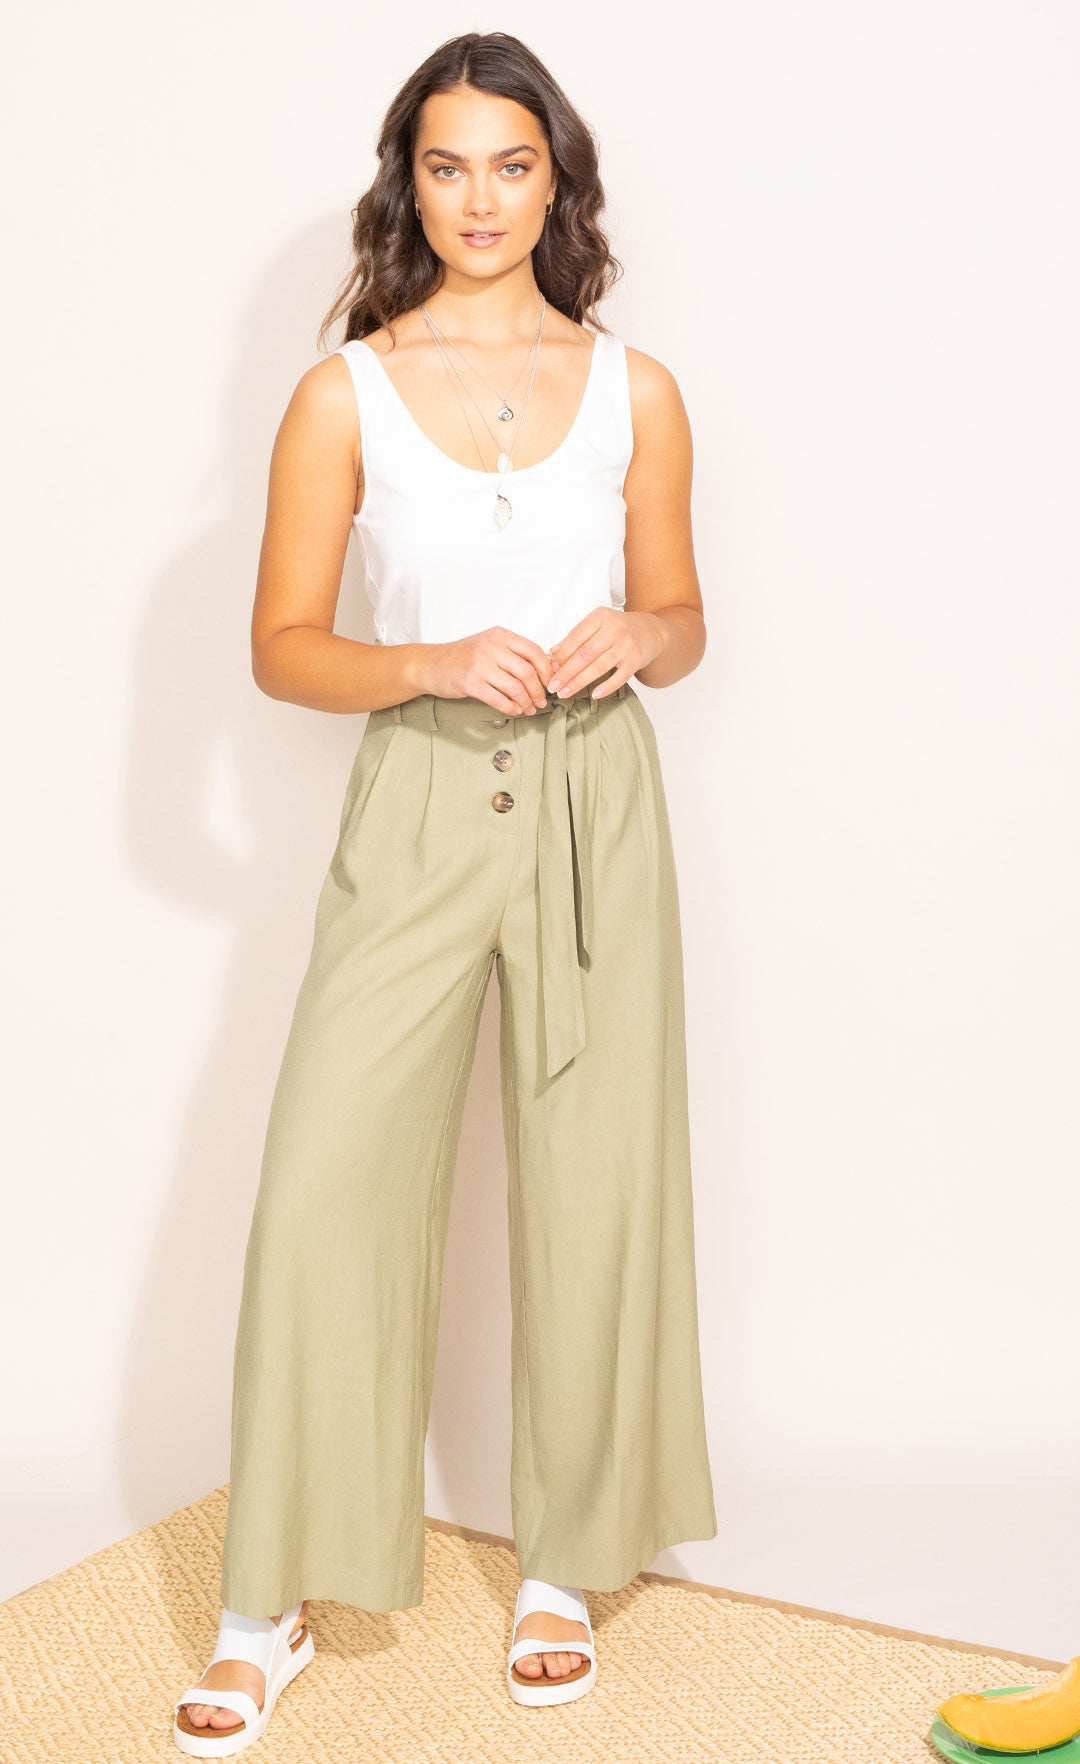 The Astra Pants - Pink Martini Collection